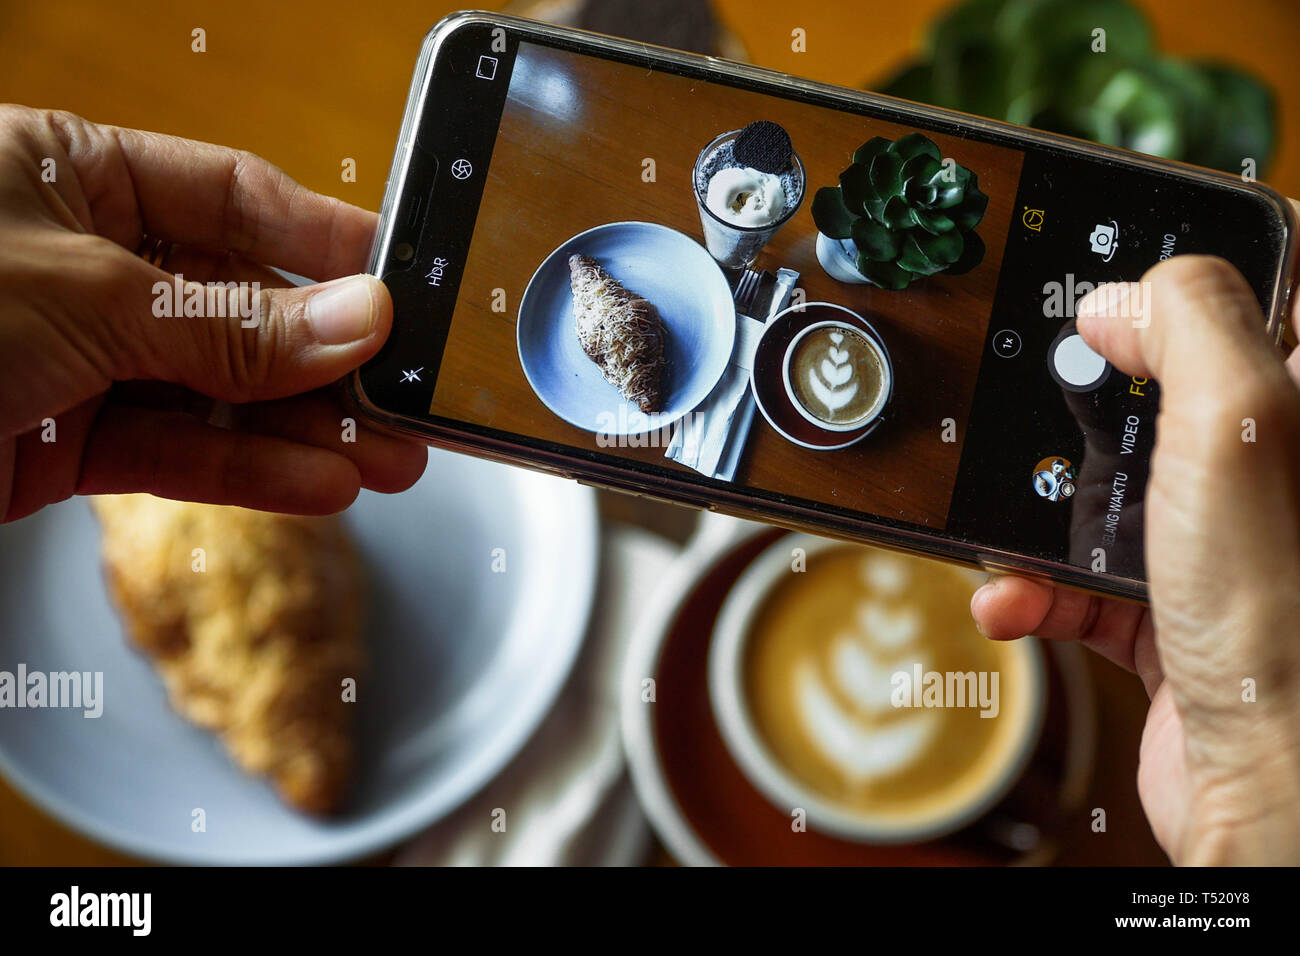 Food photography using mobile phone. Product photos of coffee latte, croissant chocolate, and blue ocean. Top view photo of food at a cafe to be Stock Photo